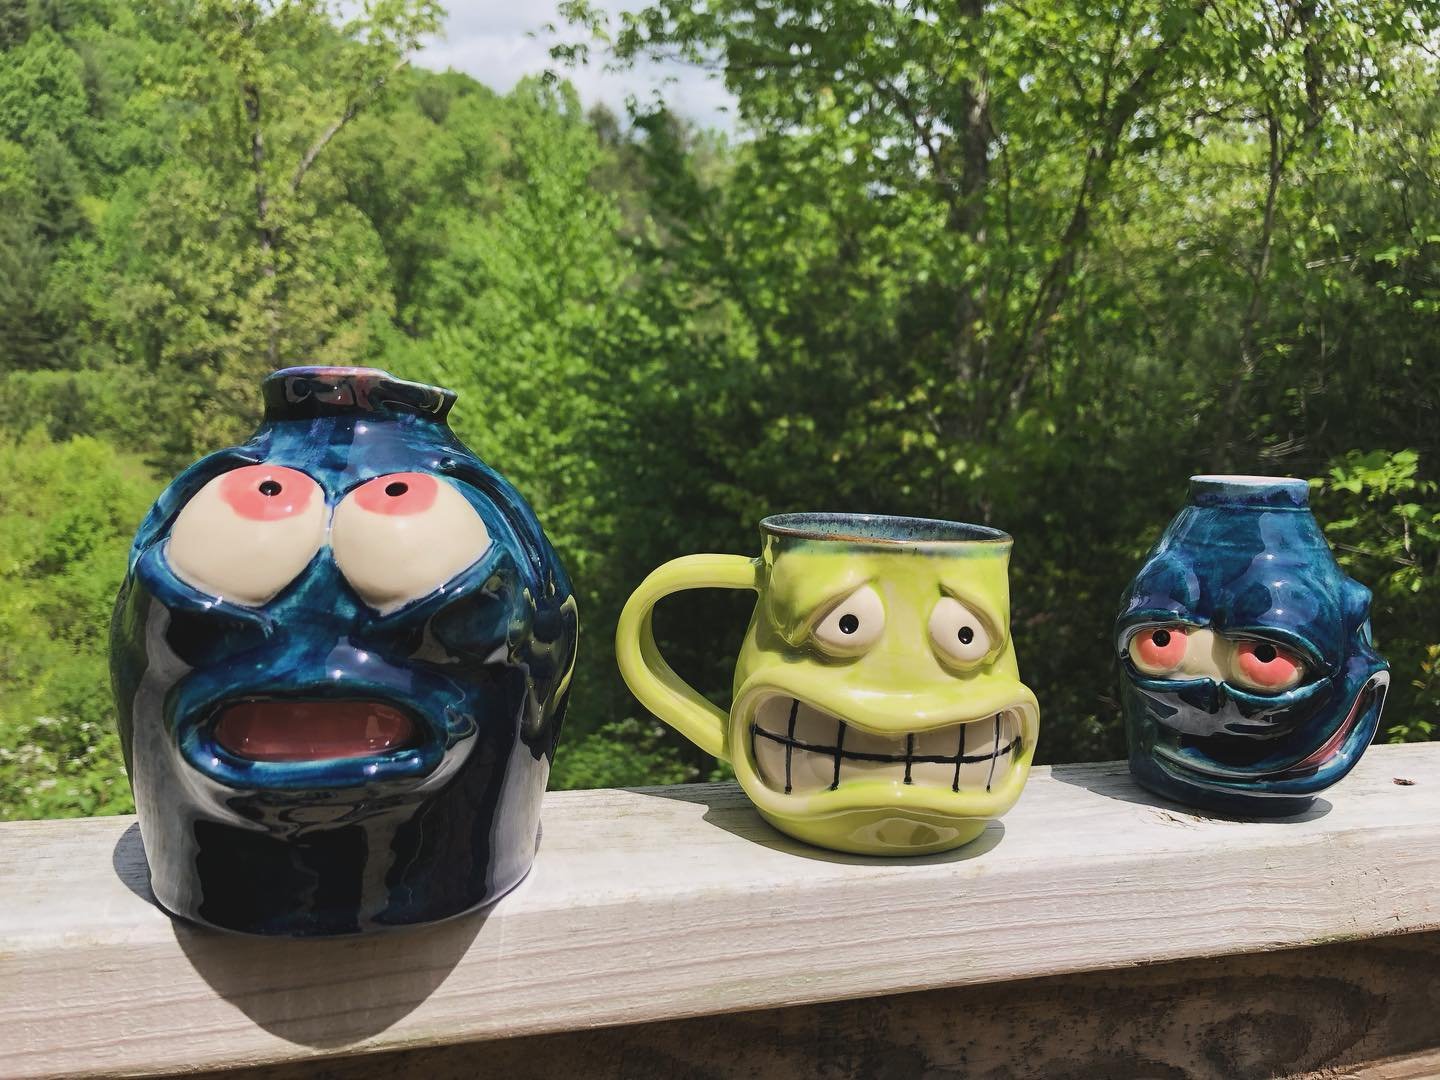 Got some anxious faces made! 

Loading up the last glaze kiln for the show! Can&rsquo;t wait to share the faces hiding it there!